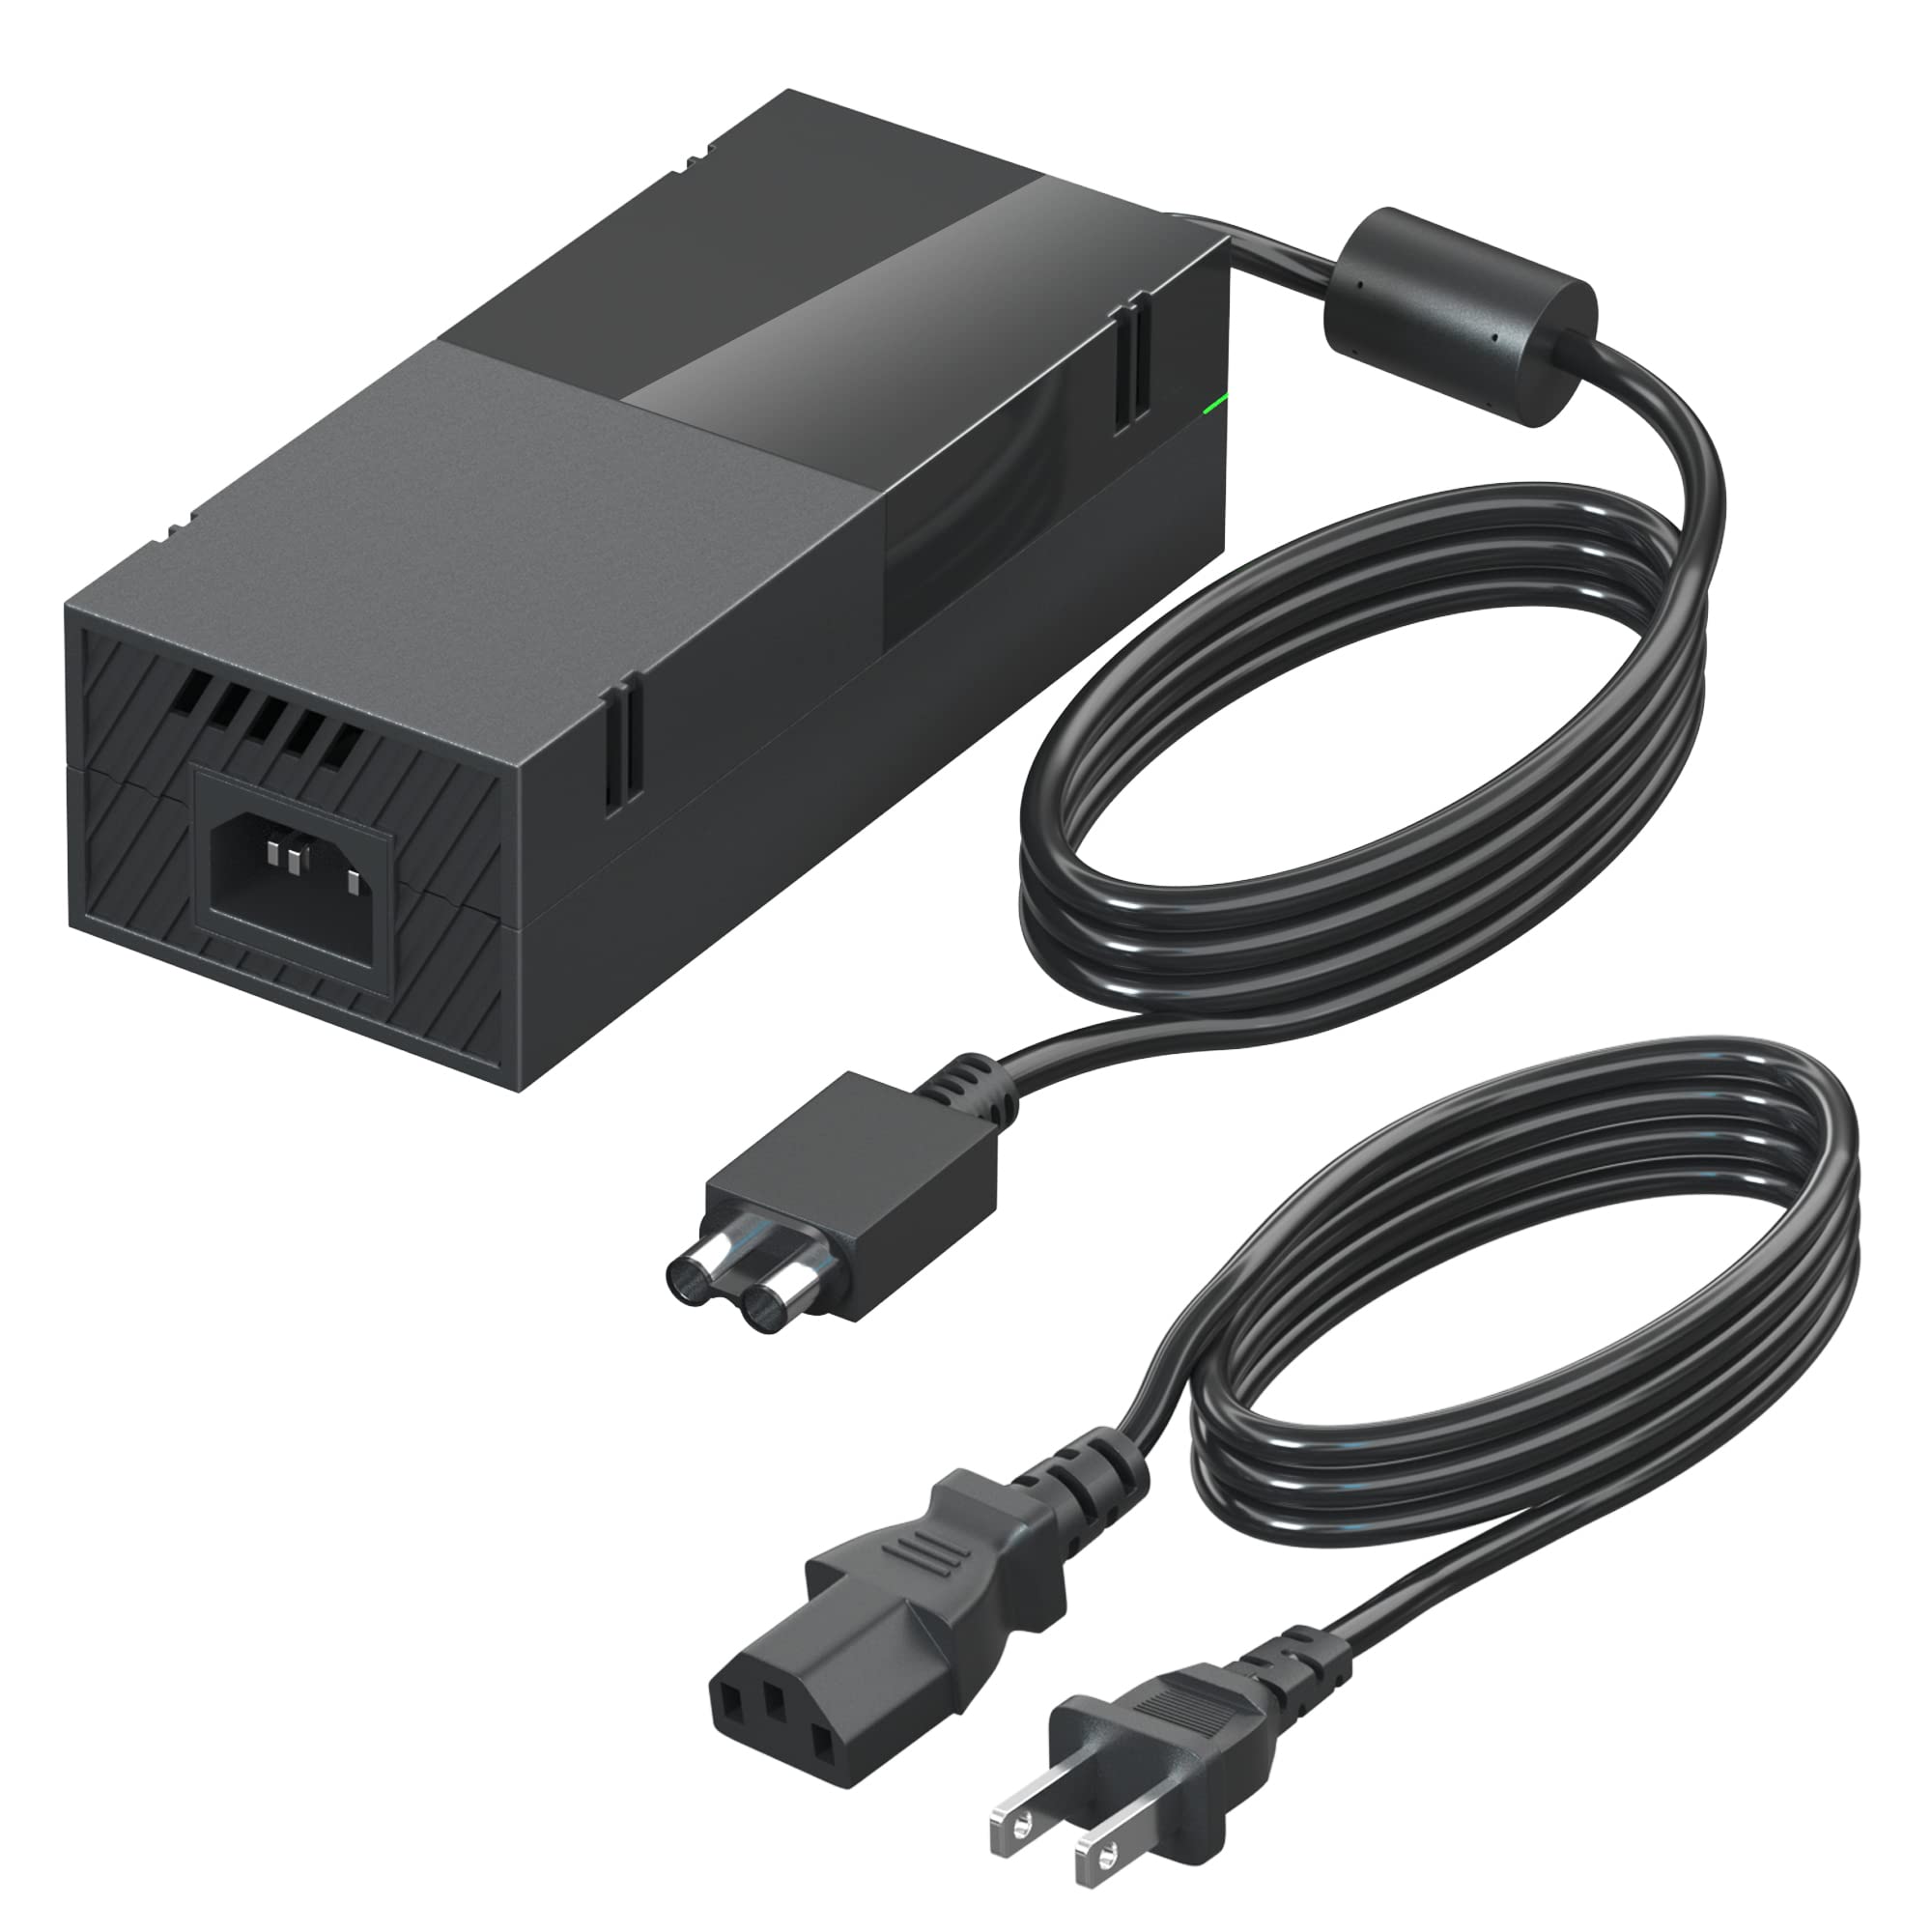 Order a replacement power supply unit from Sony or a third-party seller
Disconnect all cables and remove the old power supply unit